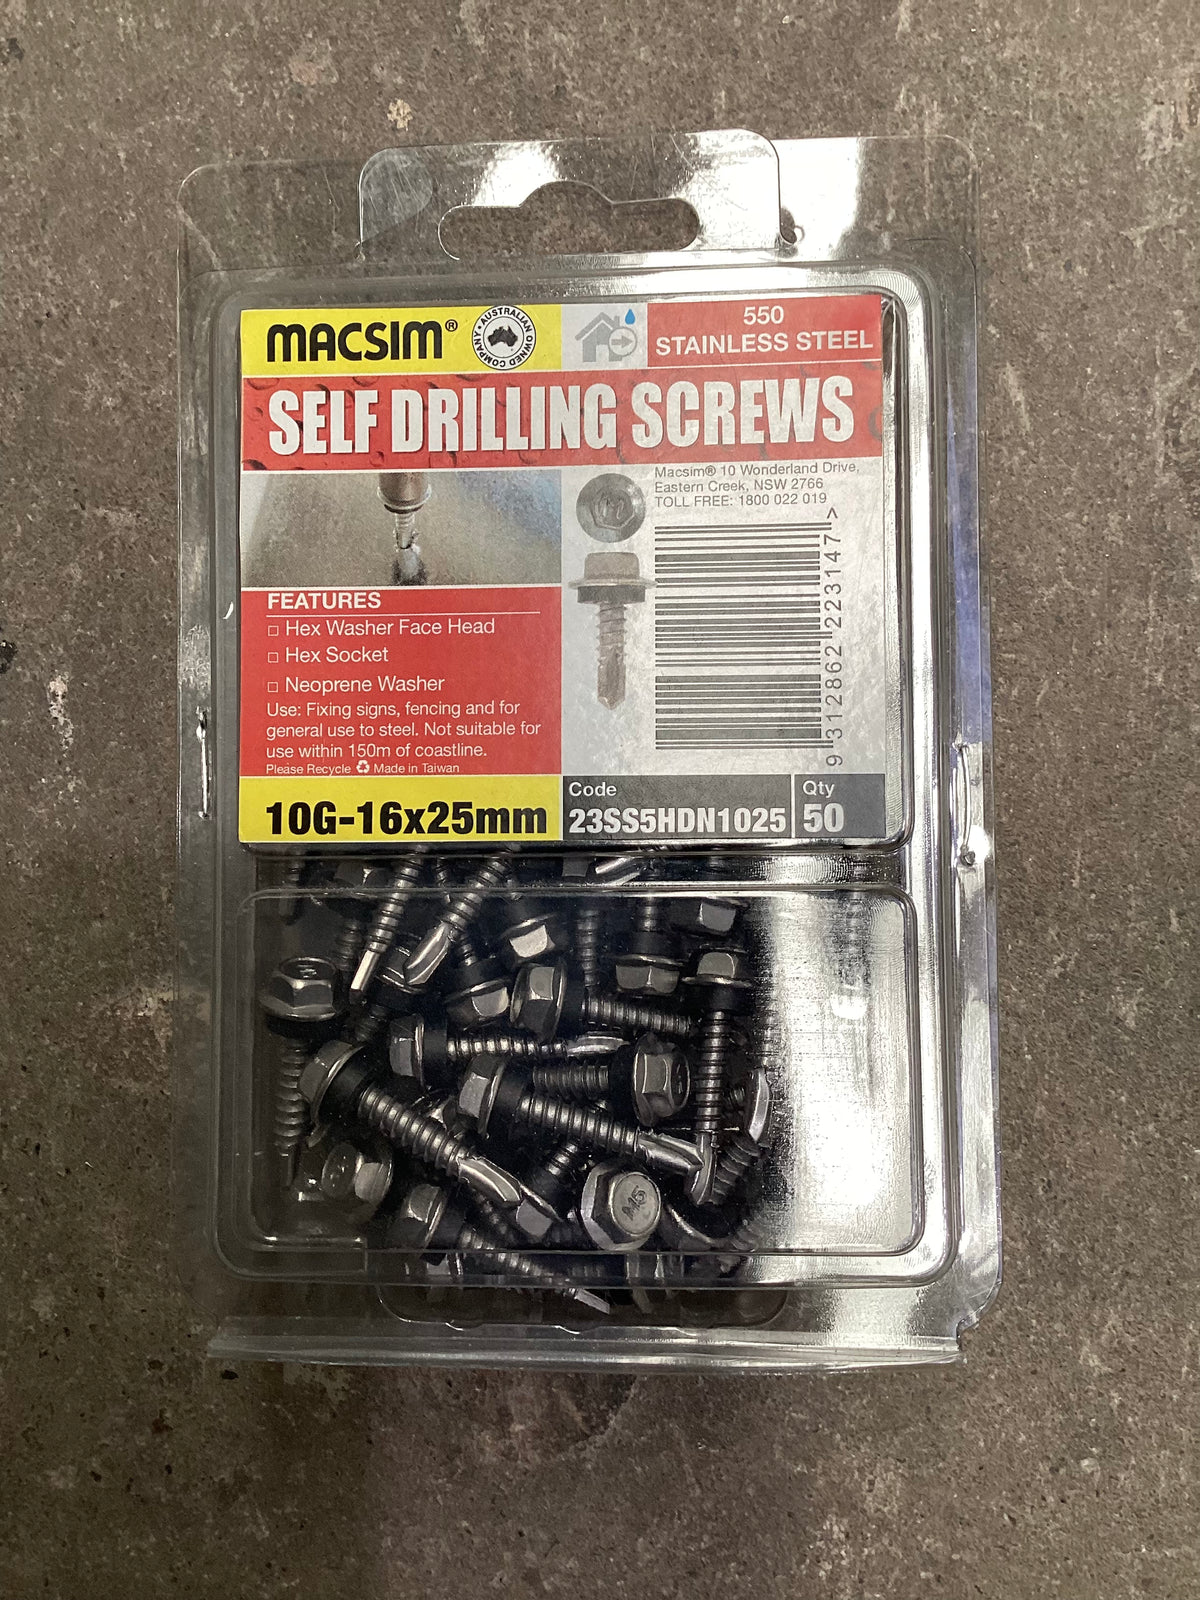 10G-16x25mm Self Drilling Screws - stainless hex washer face head